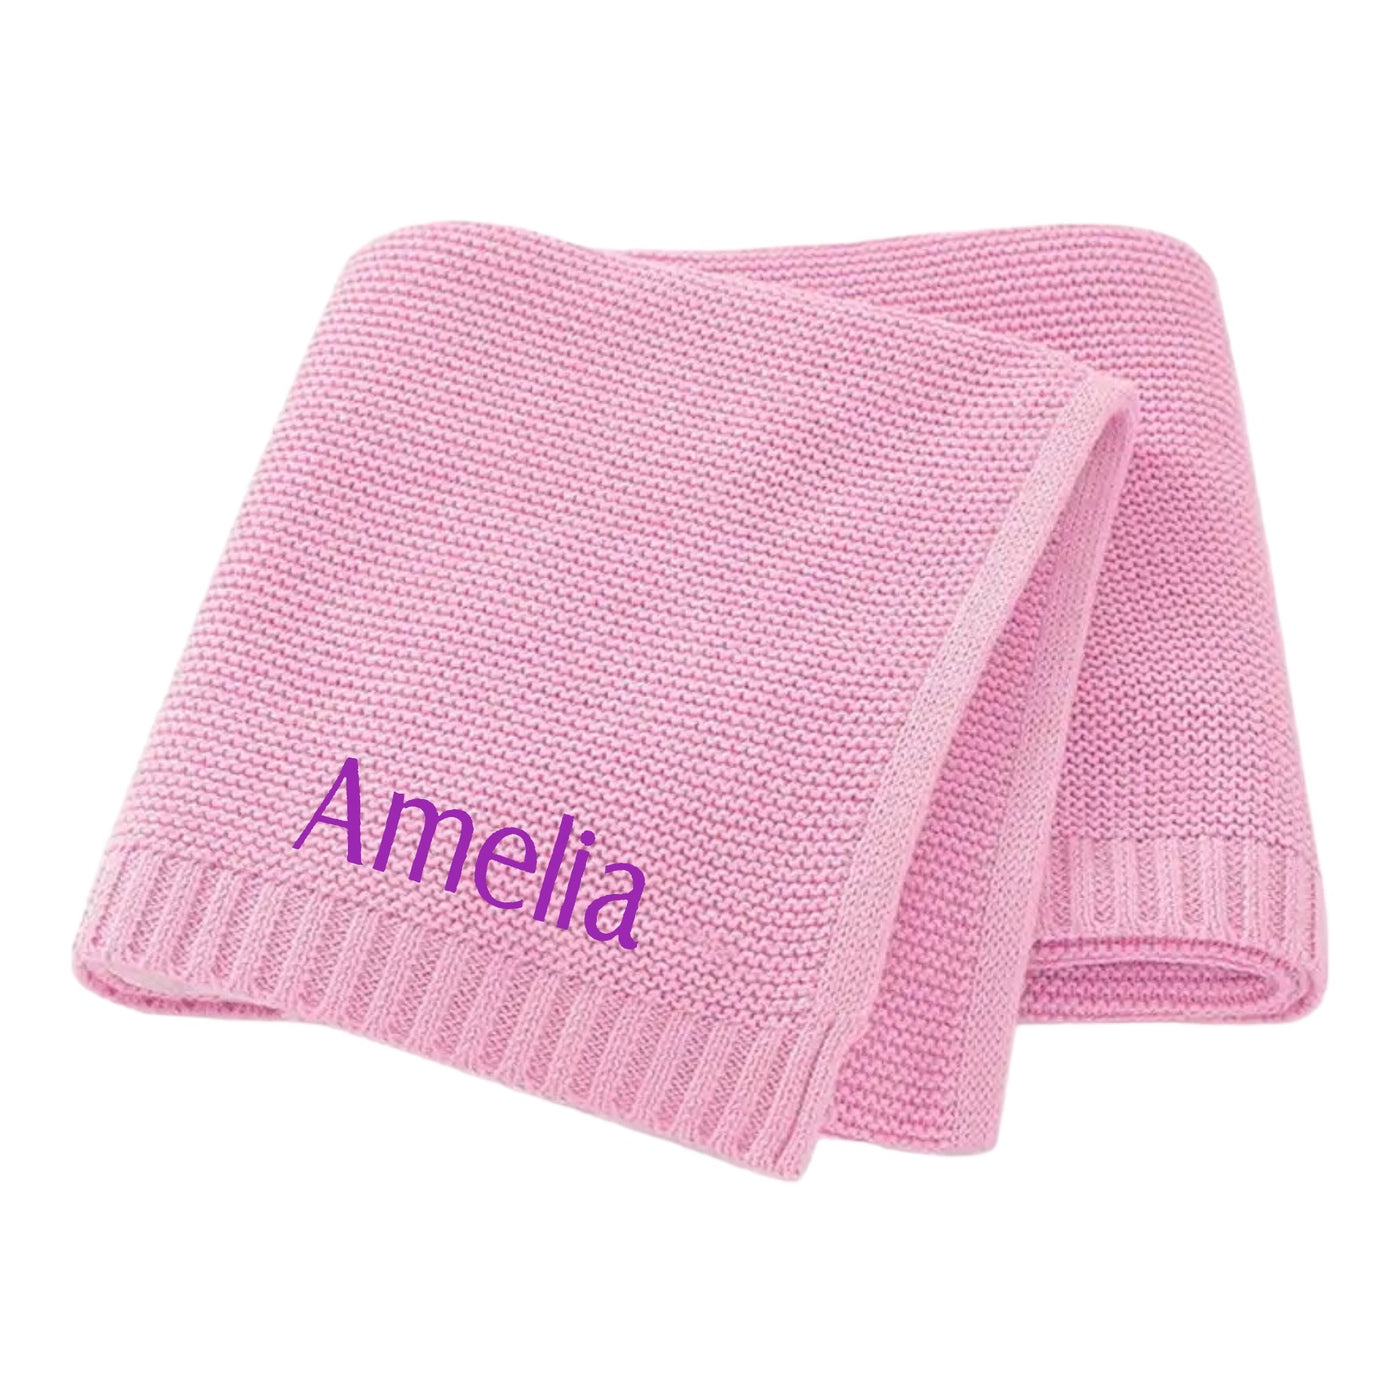 PERSONALISED BABY COTTON KNITTED BLANKET PINK